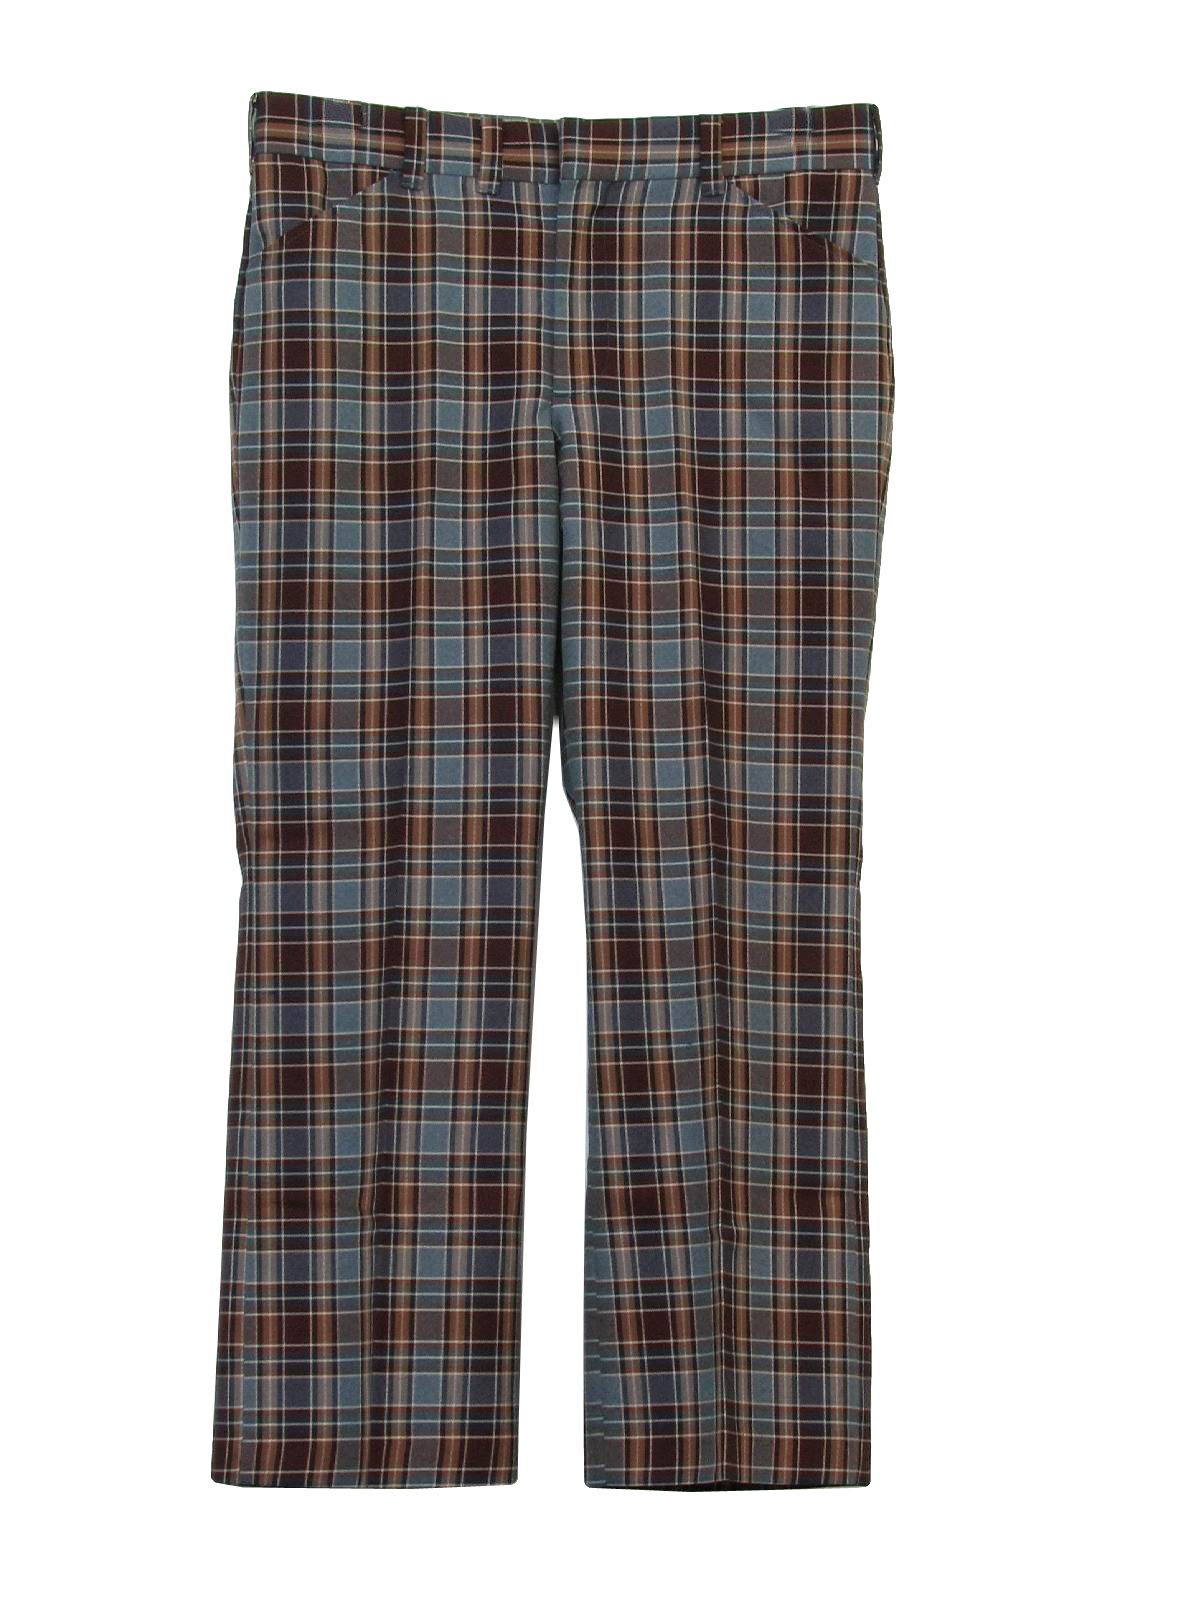 Seventies Vintage Flared Pants / Flares: 70s -JCPenney- Mens shaded ...